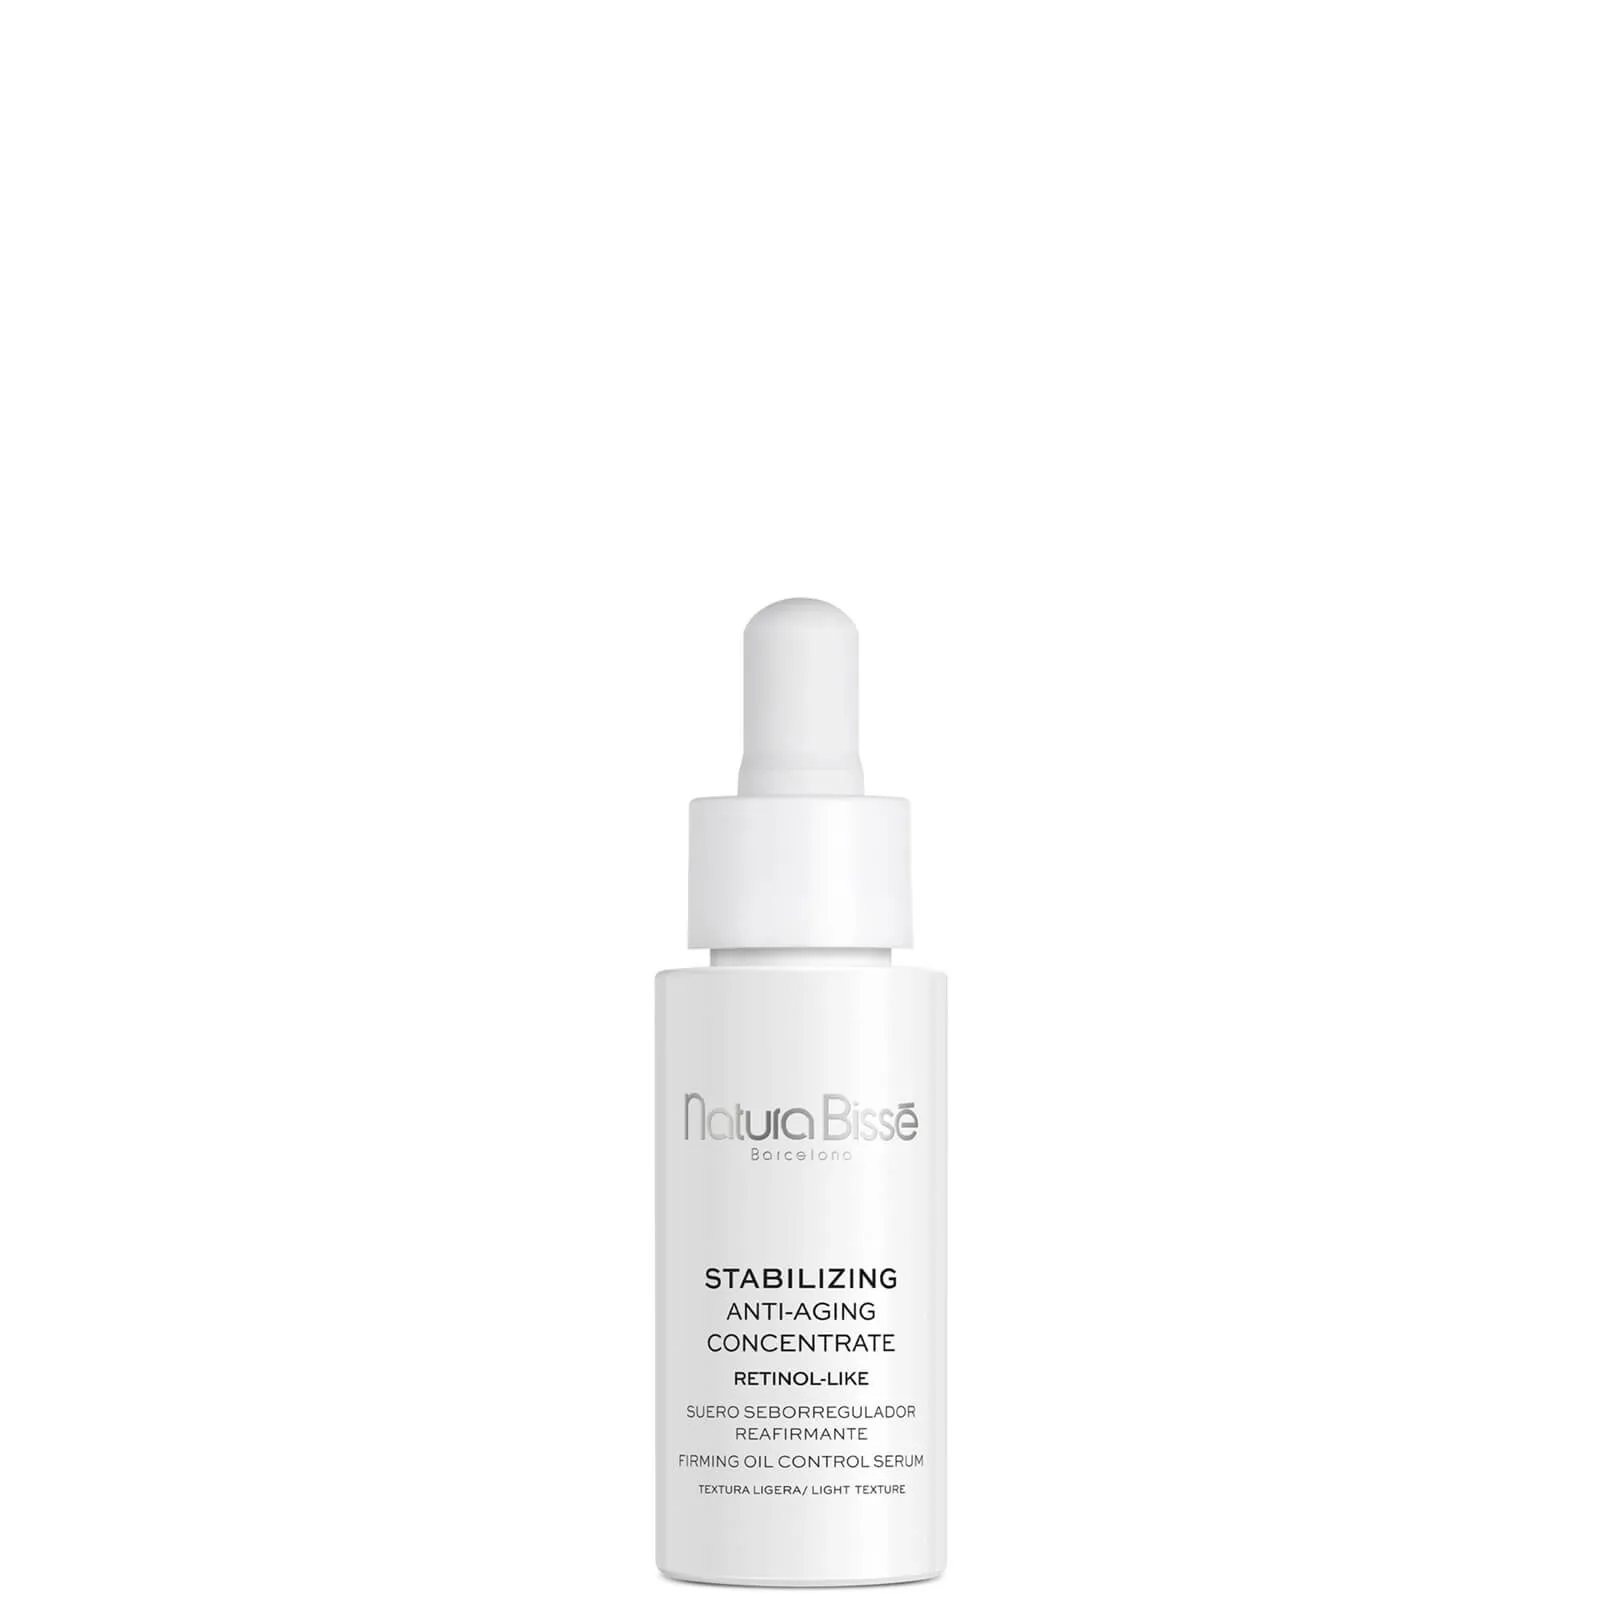  Stabilizing Anti-aging Concentrate 30ml